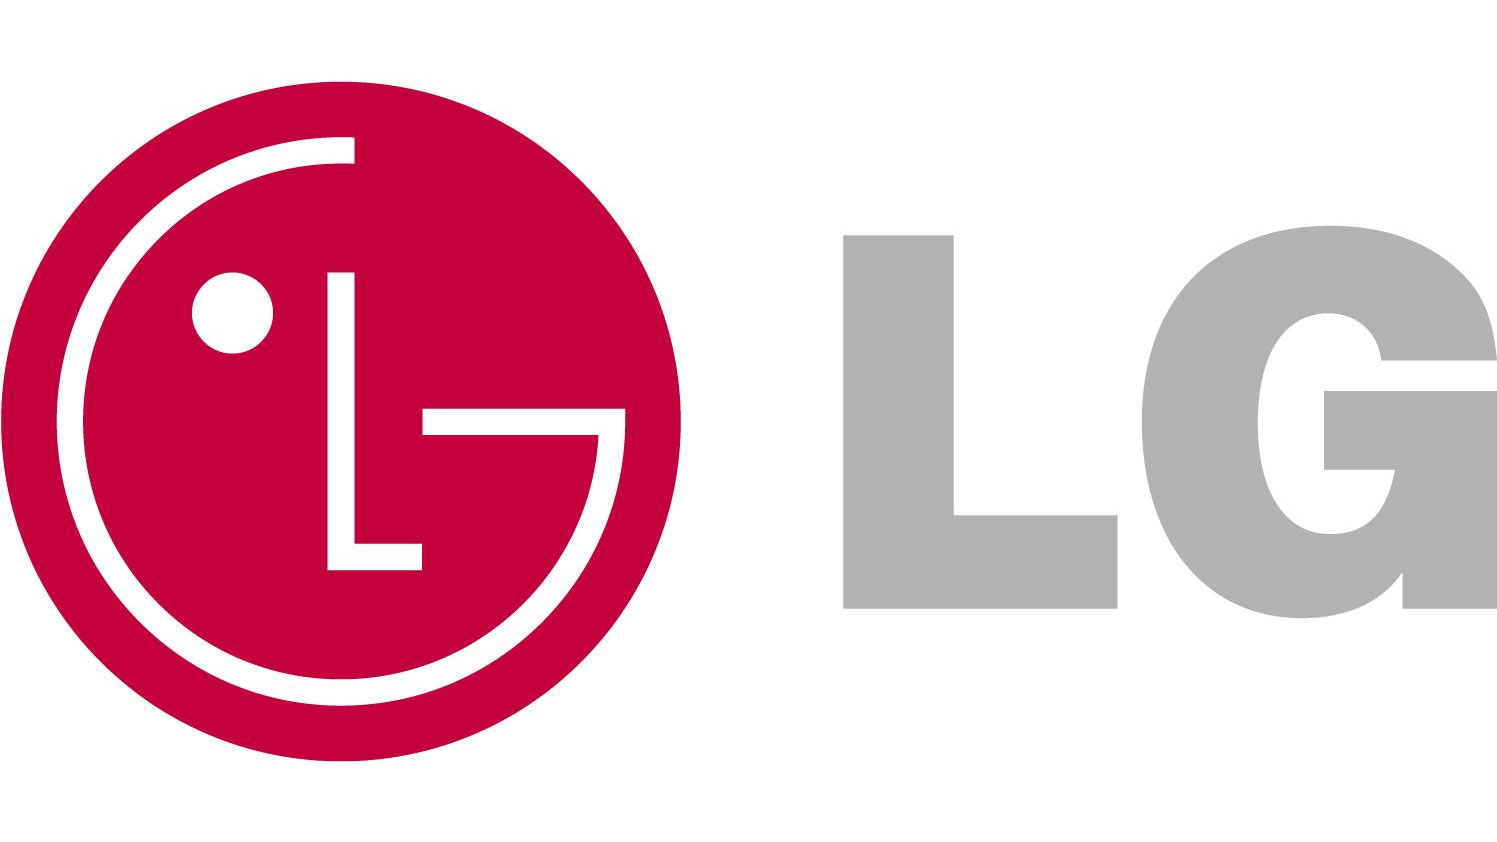 A2-4K-OLED-TV-with-LG-AI-ThinQ-Display-logo